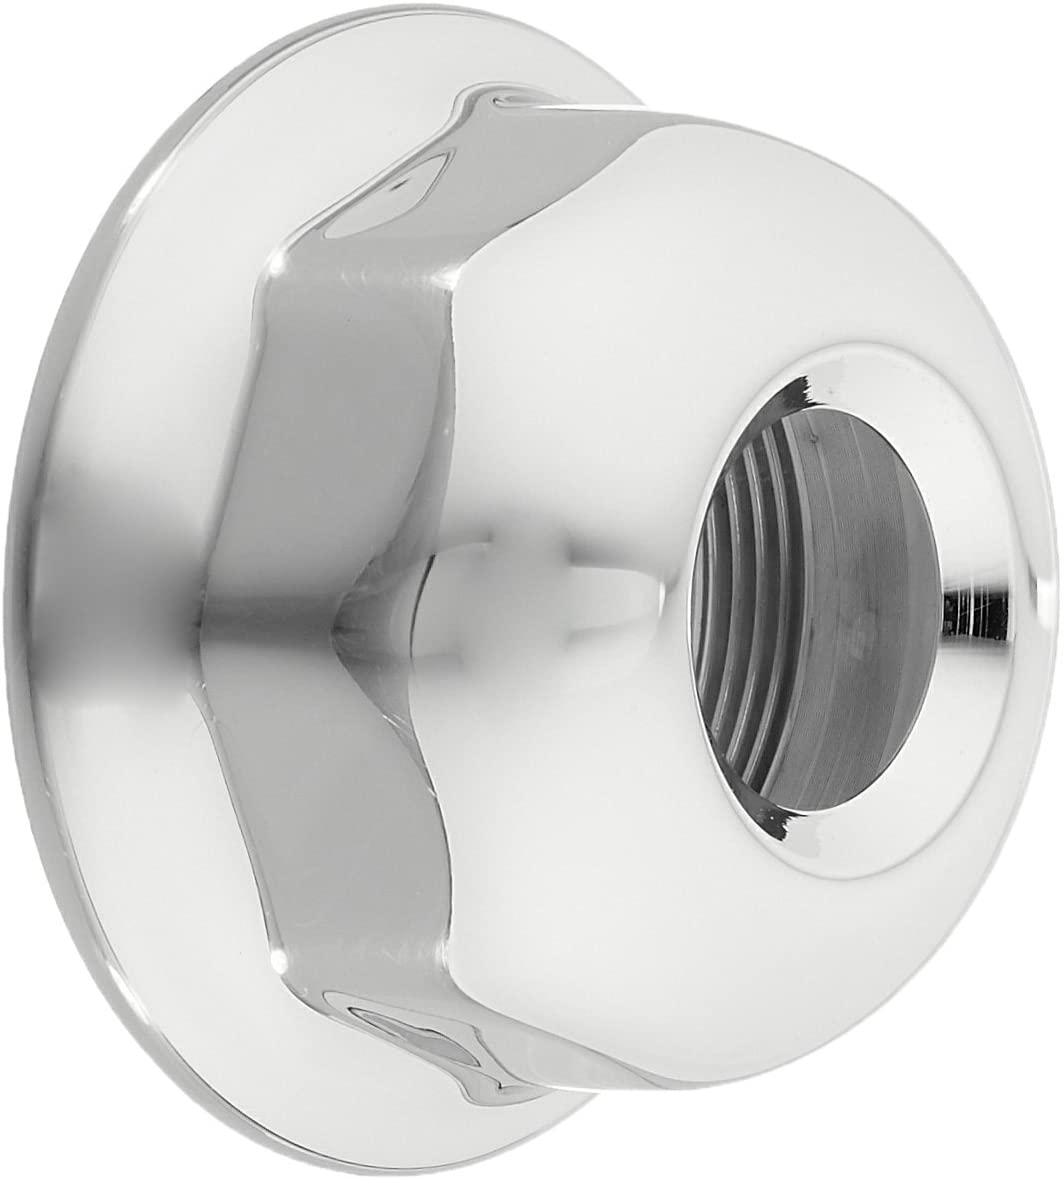 Perrin & Rowe Dome Hood Only for Thermostatic Mixers Polished Chrome